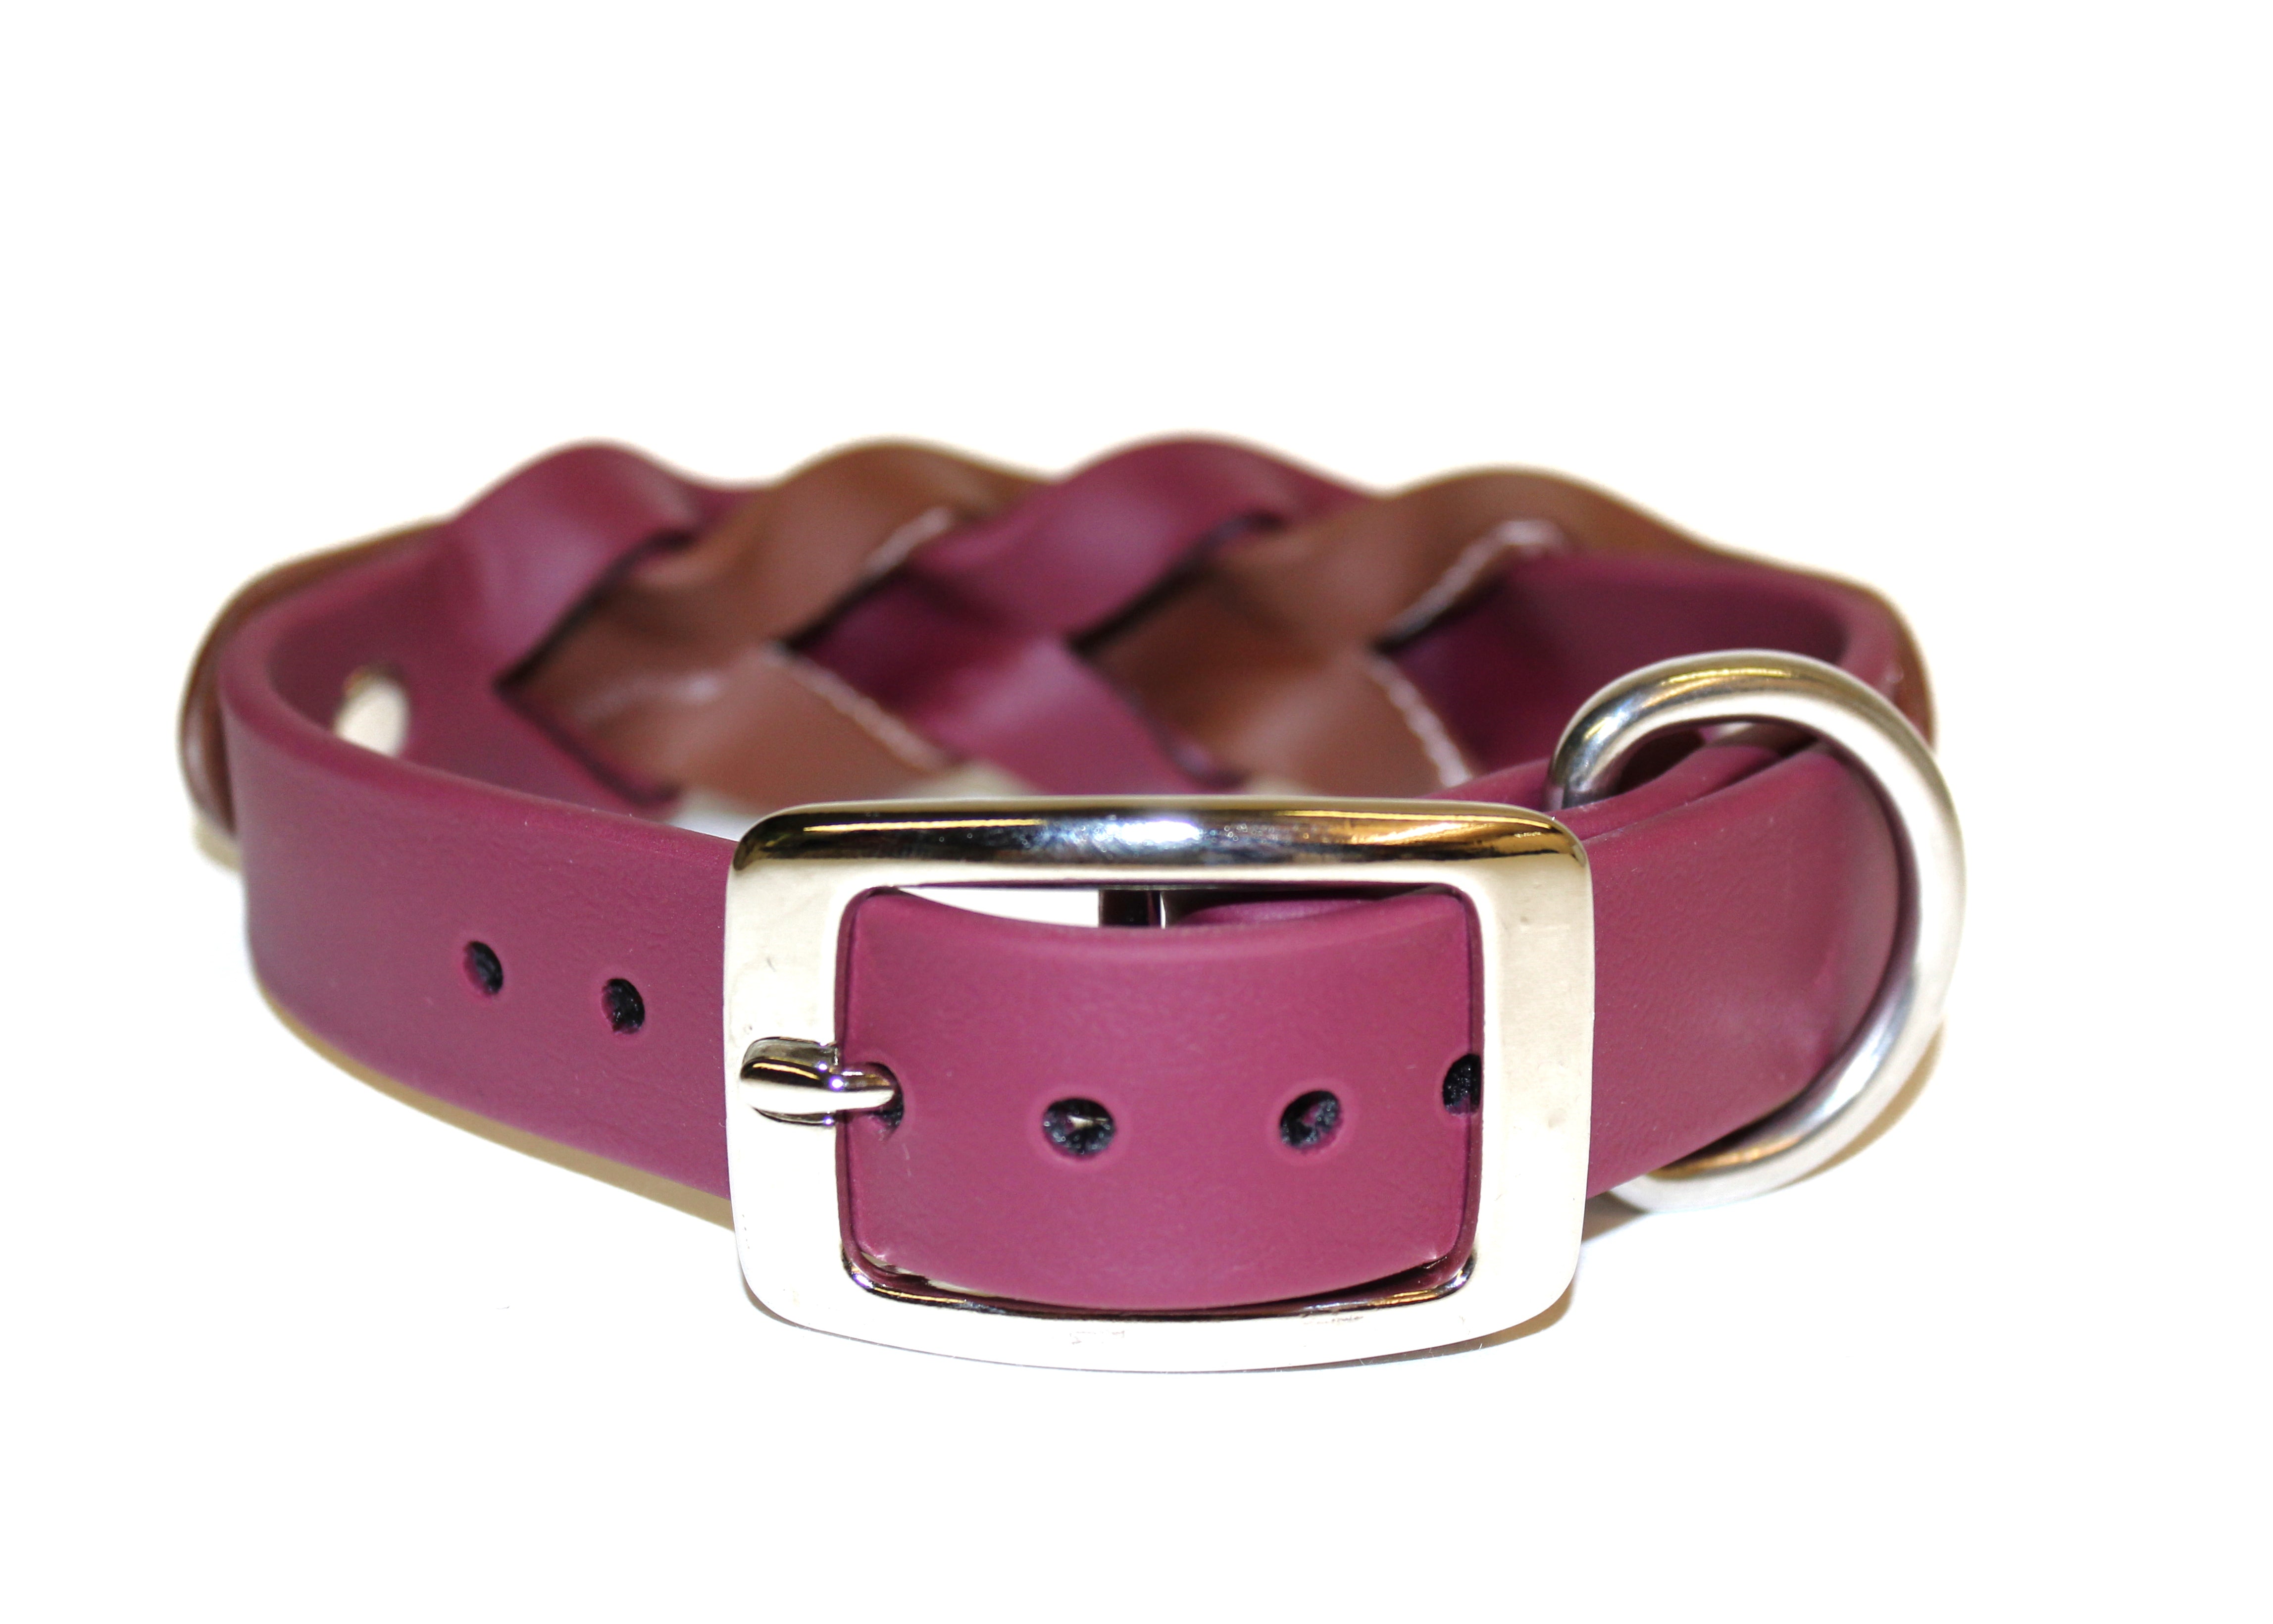 SALE • Chai & Sangria • Trenza Collar • 12-15” •Nickel Plated • 1" Wide